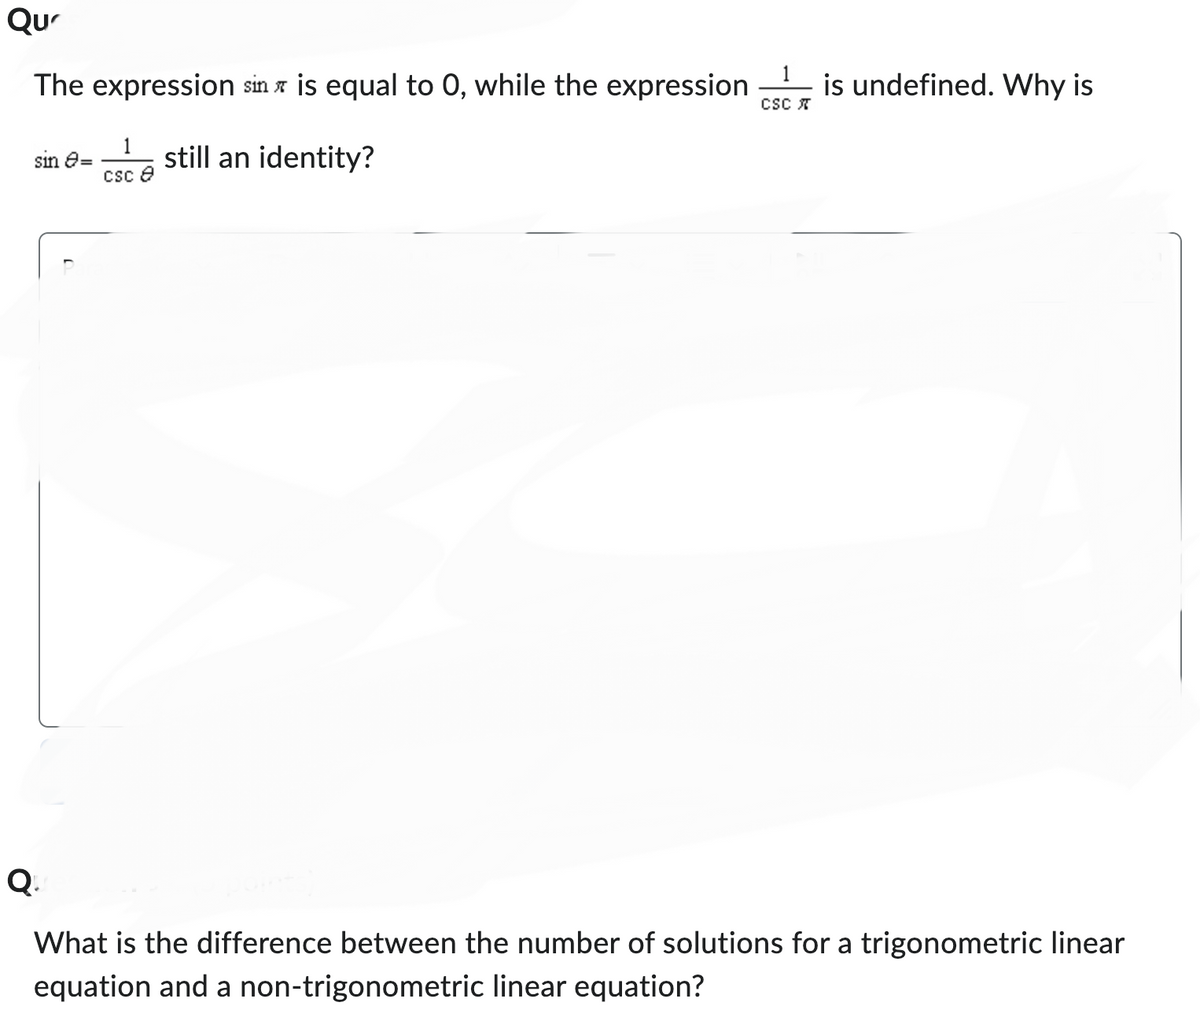 Que
The expression sin is equal to 0, while the expression
sin >= still an identity?
1
csc 8
Q.
CSC
is undefined. Why is
What is the difference between the number of solutions for a trigonometric linear
equation and a non-trigonometric linear equation?